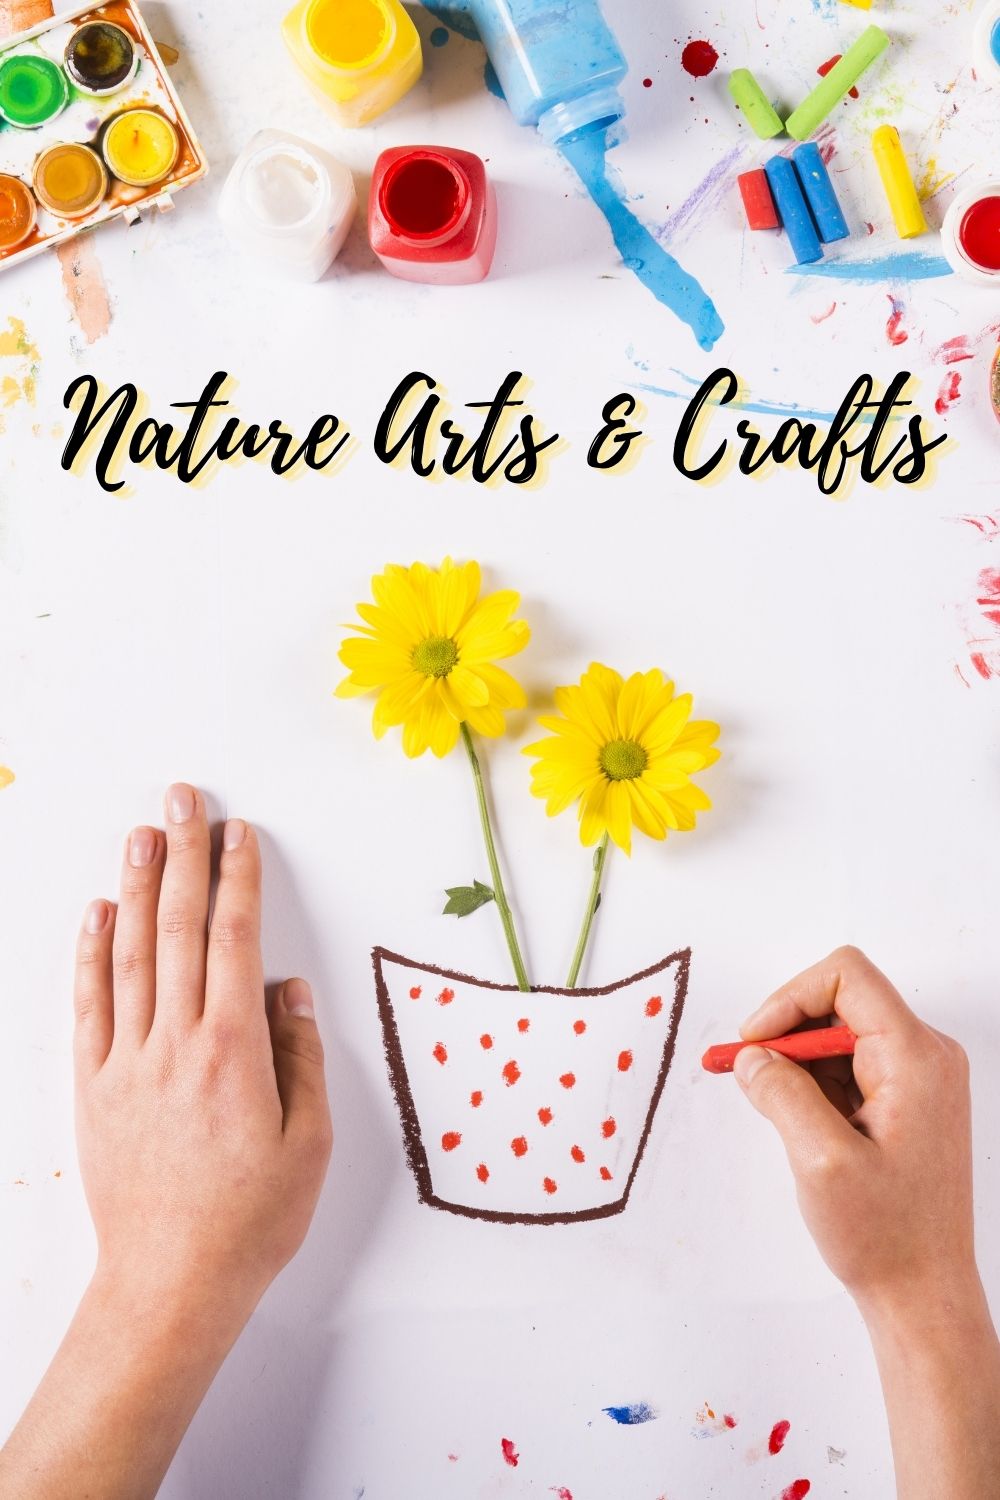 Let the kids be creative with what they find outdoors. Here are 10 of my favorite arts & crafts projects for kids that use objects in nature.